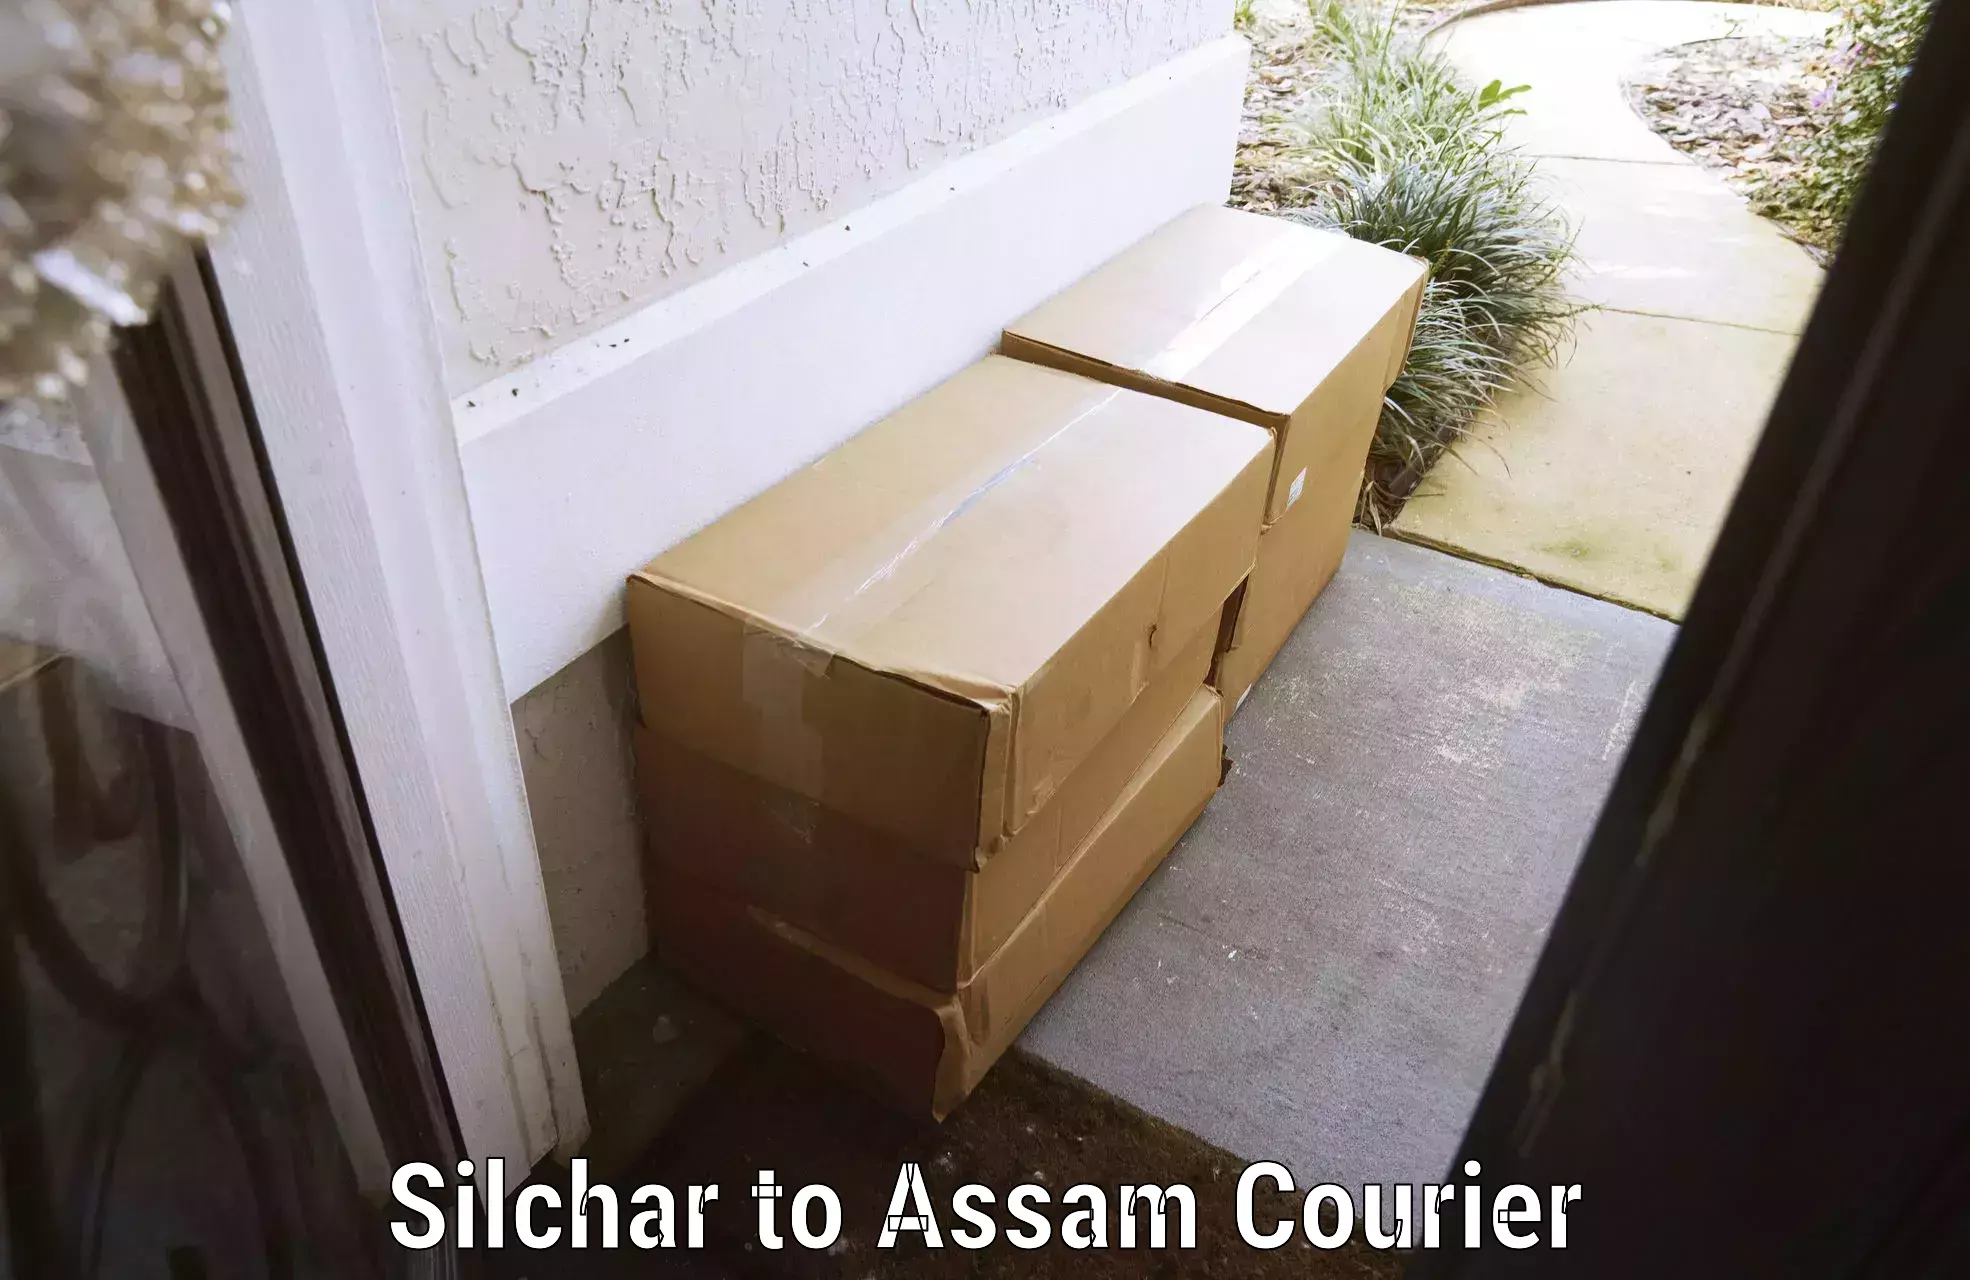 Luggage delivery logistics Silchar to Cachar